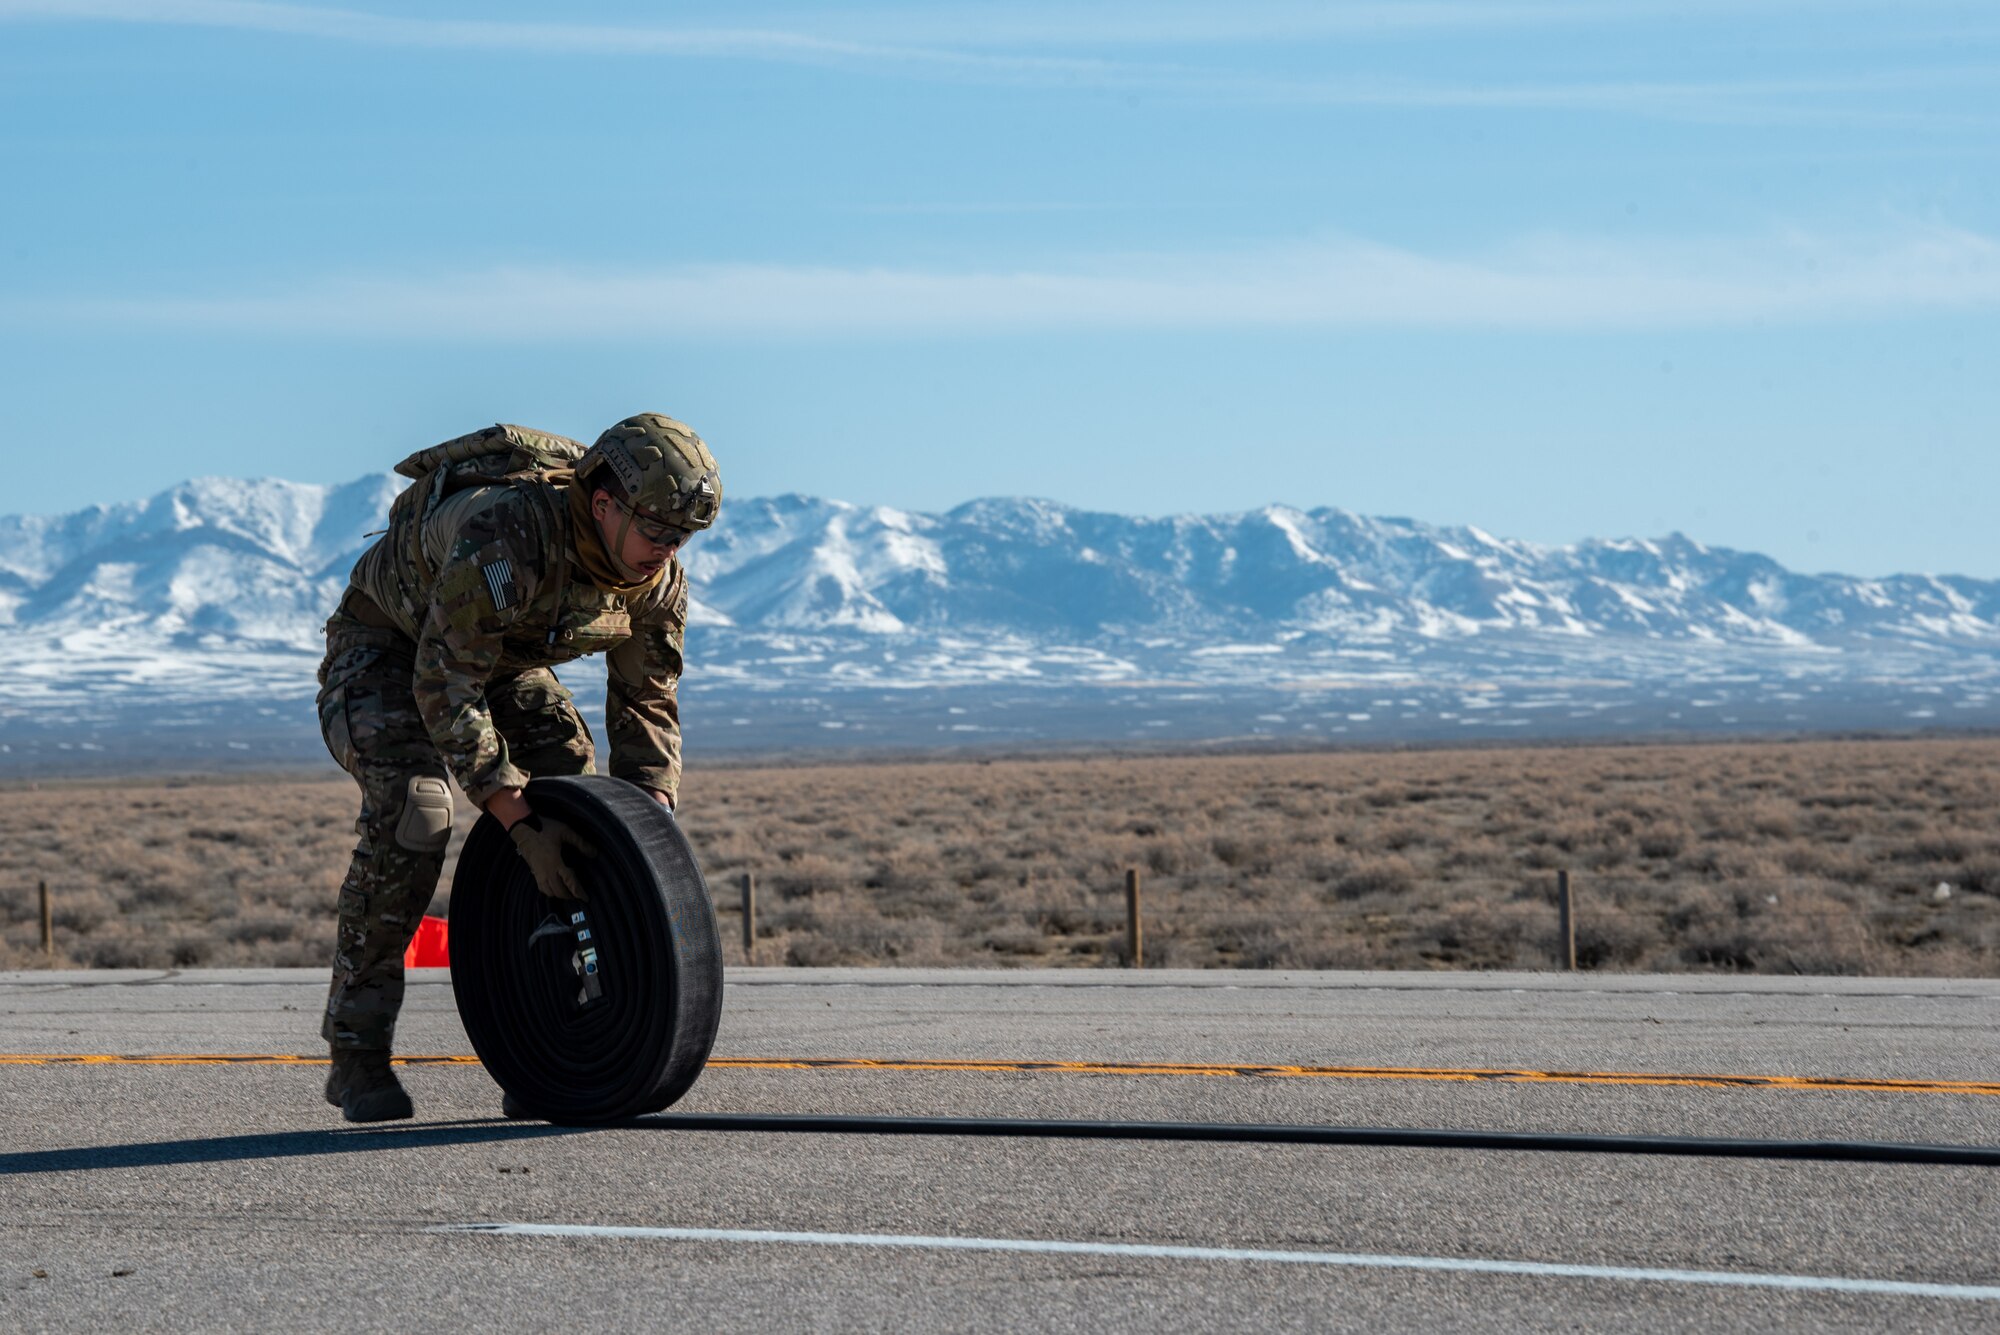 An Airman with the 1st Special Operations Wing rolls up a fuel hose after conducting Forward Arming and Refueling Point operations on Highway 287 in Wyoming during Exercise Agile Chariot on April 30, 2023, honing capabilities linked to Agile Combat Employment. Instead of relying on large, fixed bases and infrastructure, ACE employs smaller, more dispersed locations and teams to rapidly move aircraft, pilots and other personnel as needed. Under ACE, millions of miles of public roads can serve as functional runways with Forward Arming and Refueling Points when necessary. (U.S. Air National Guard photo by Master Sgt. Phil Speck)